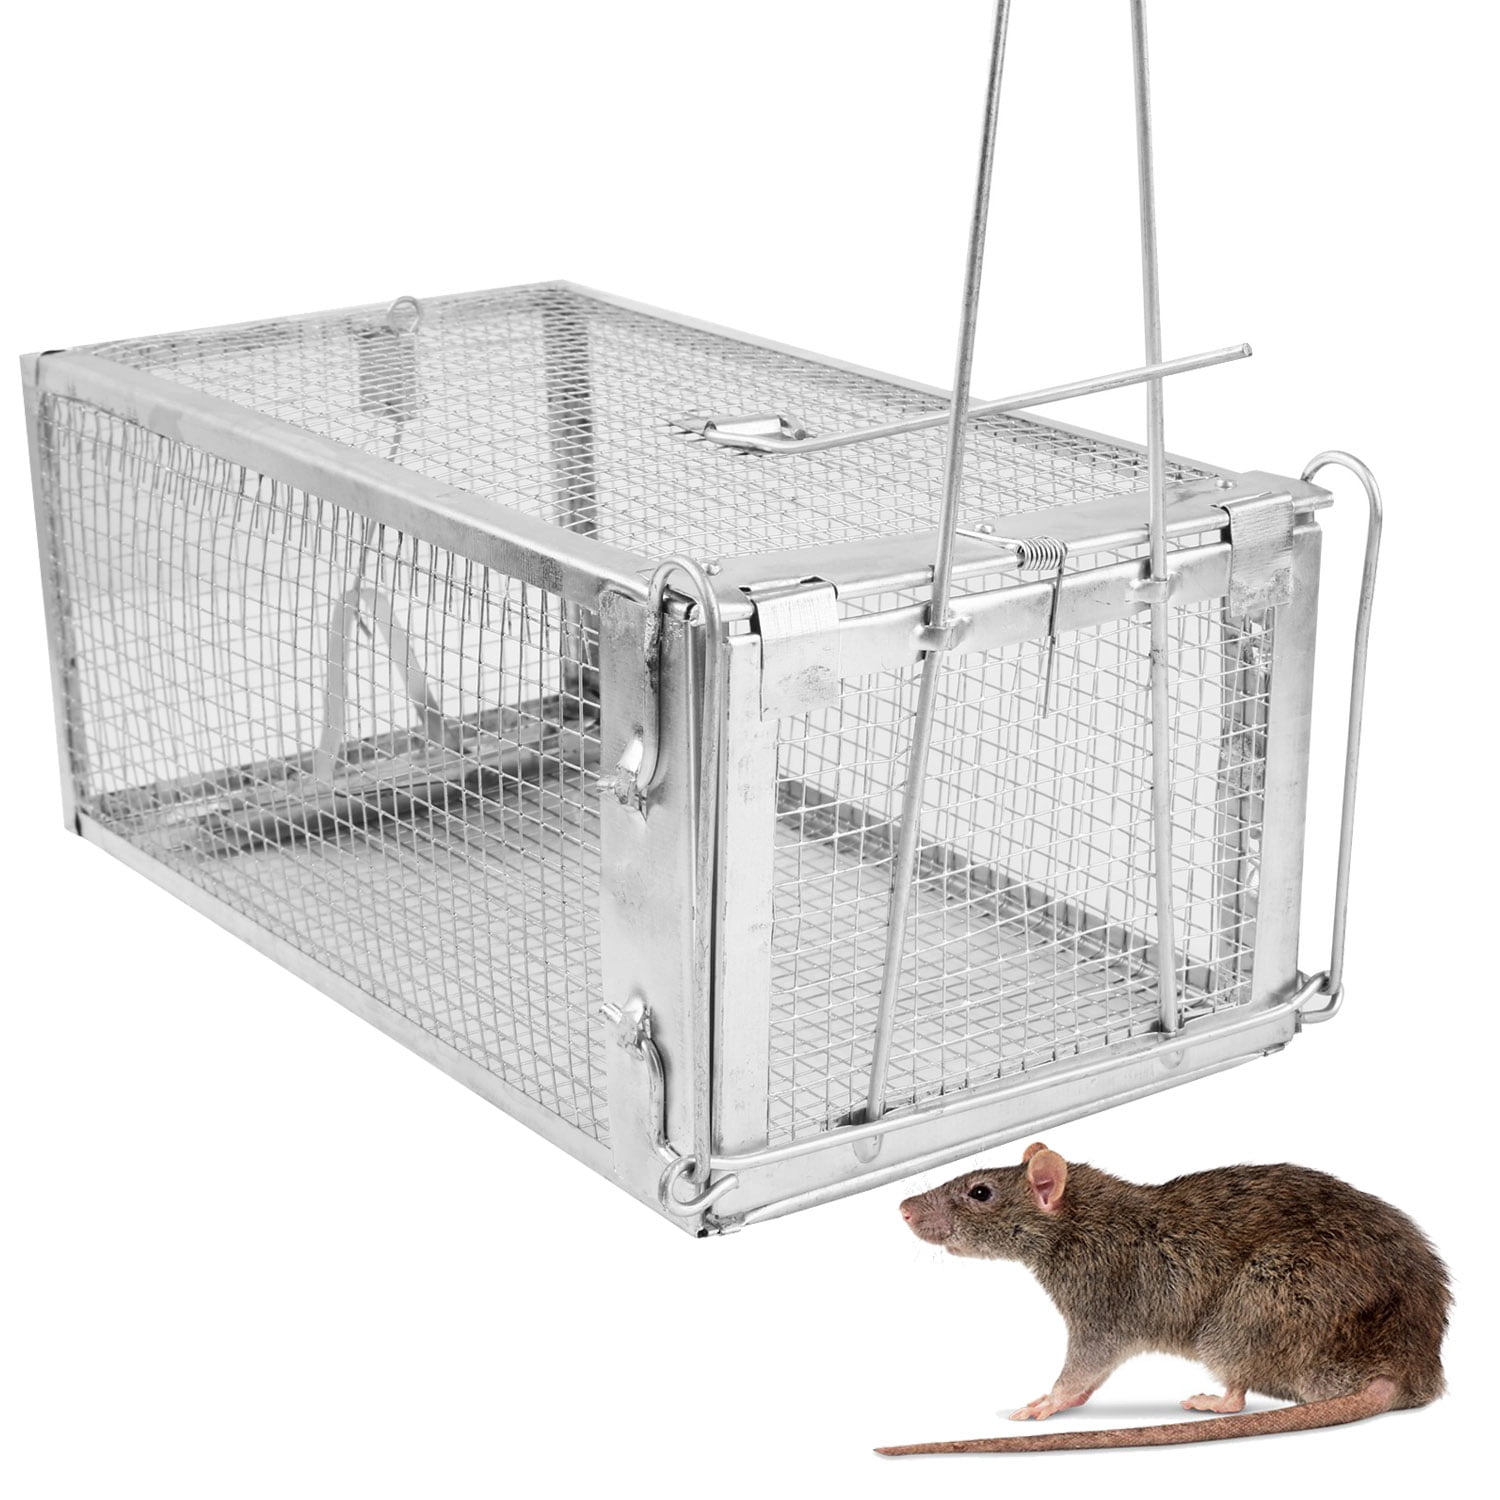 Rat Trap Cage Small Live Animal Pest Rodent Mice Mouse Control Bait Catch Tools 